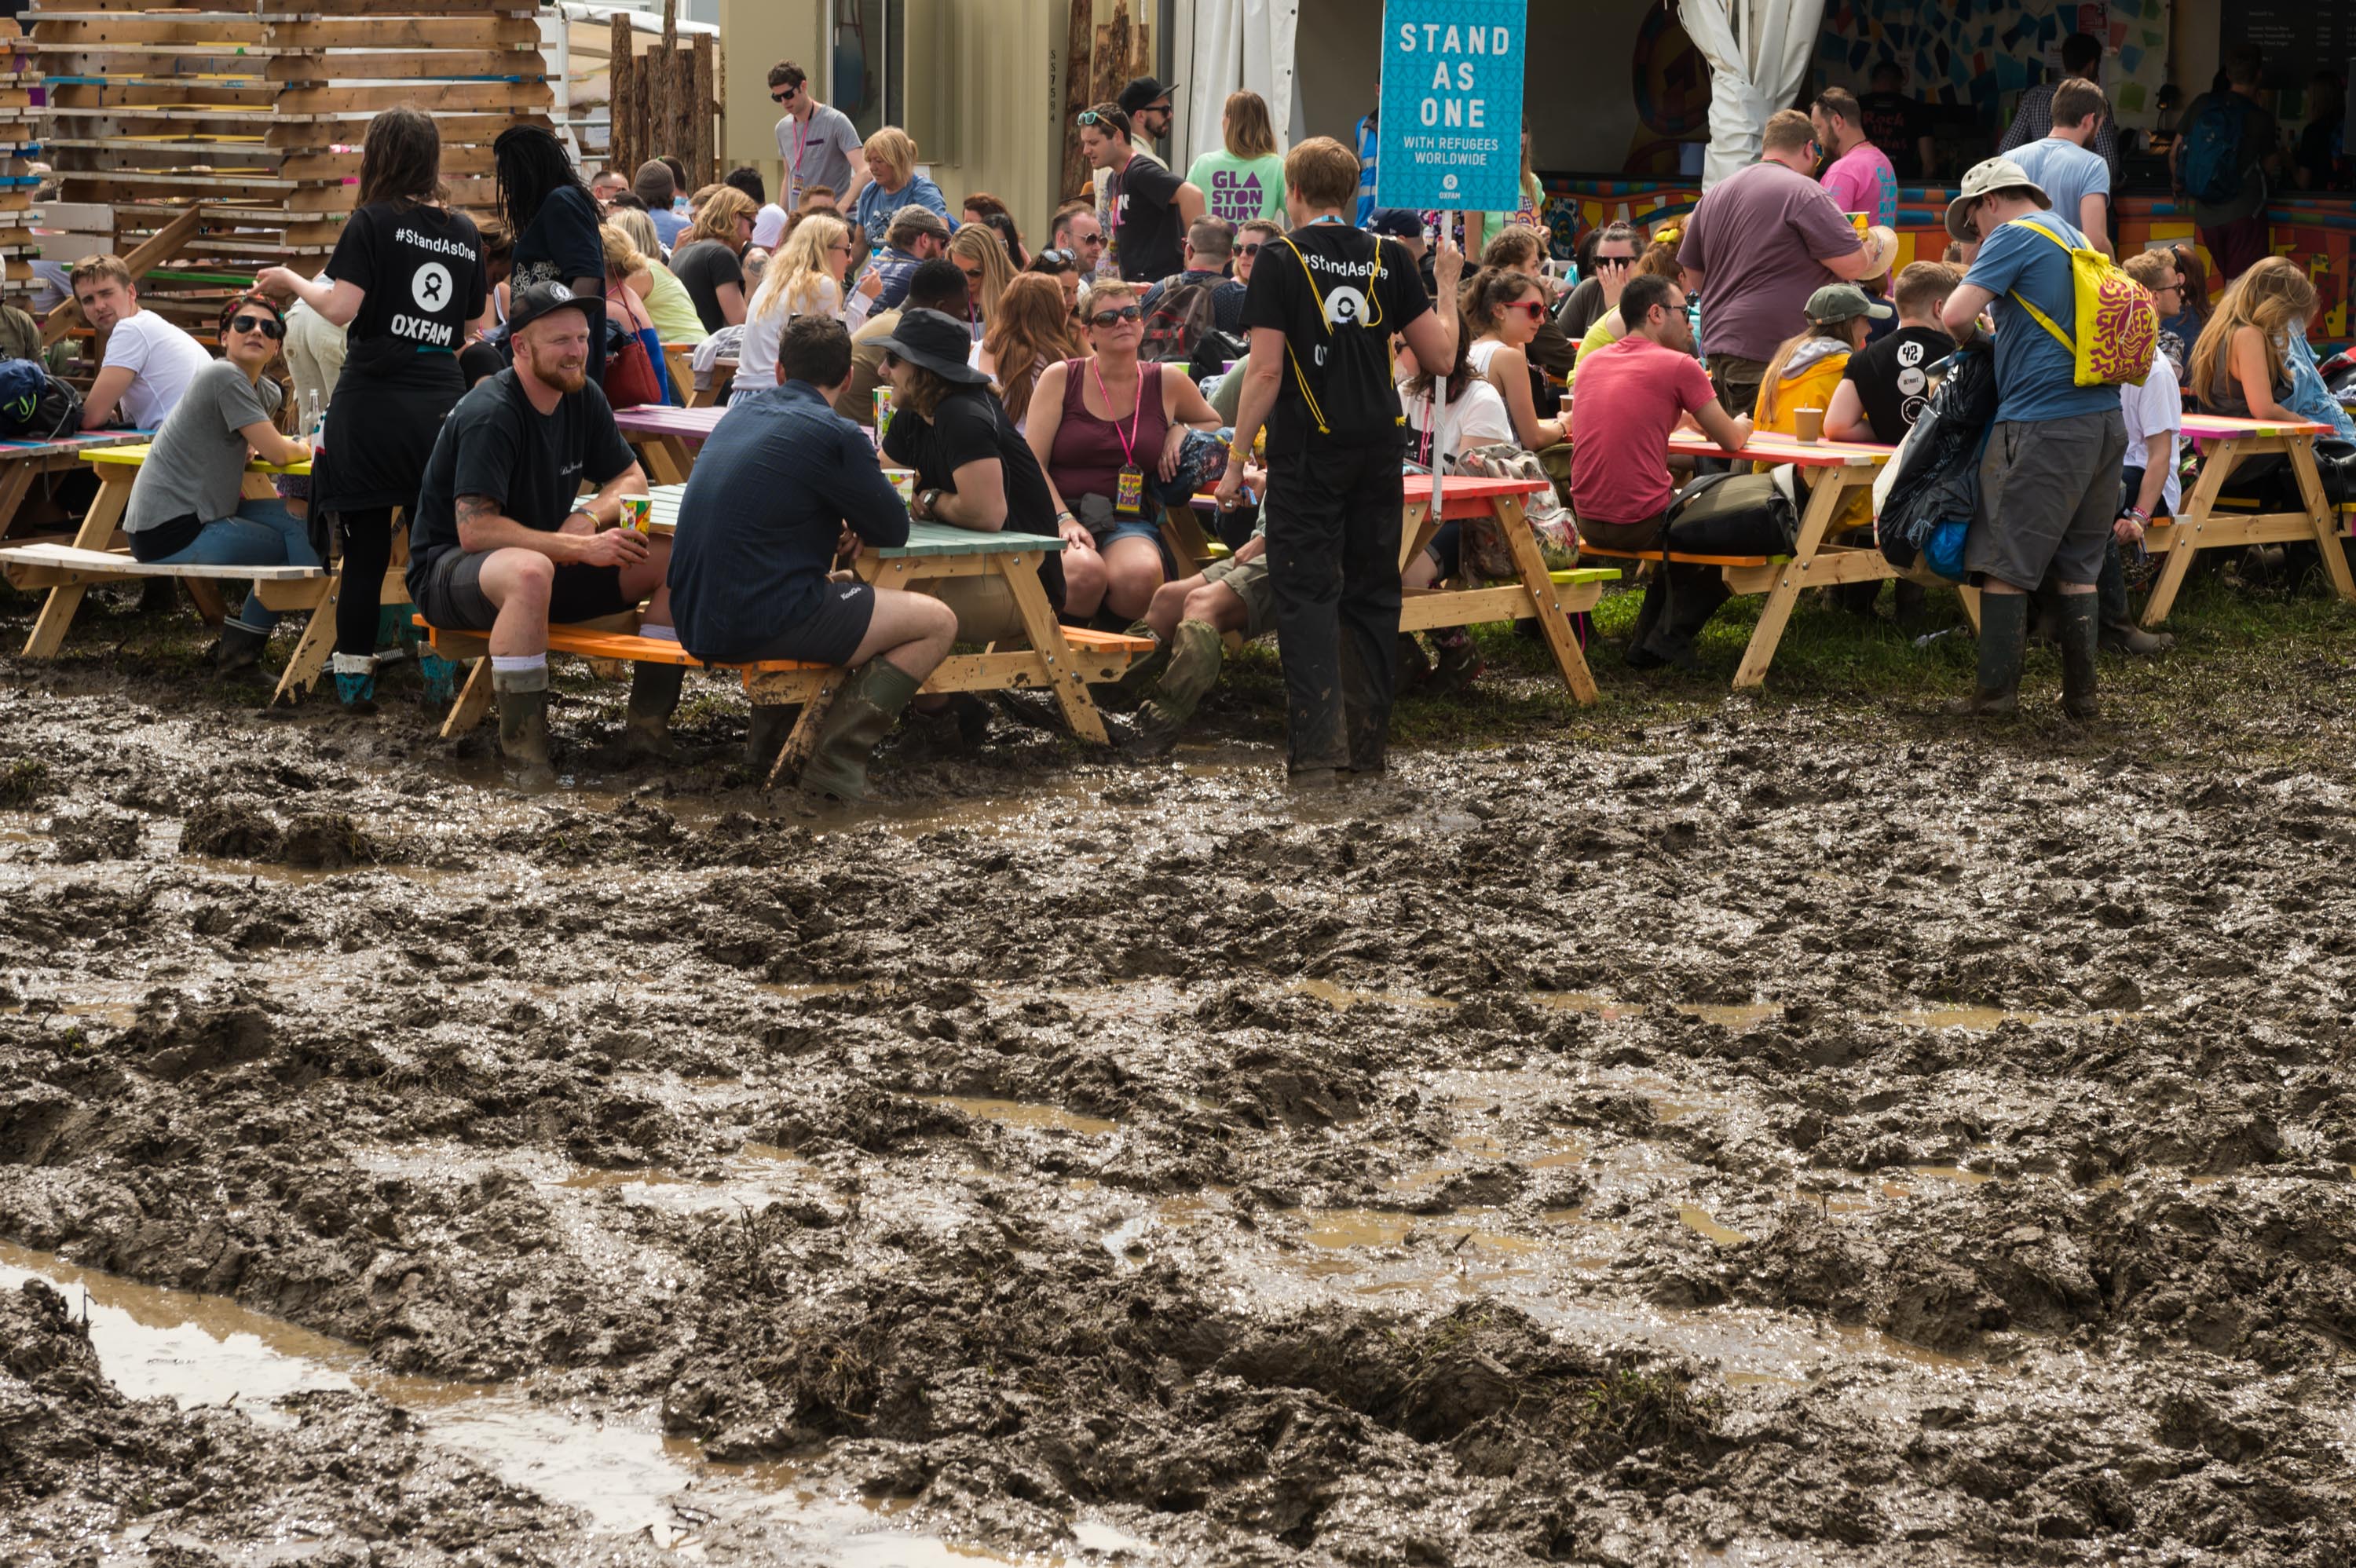 Festival-goers eating lunch in the thick mud in 2016